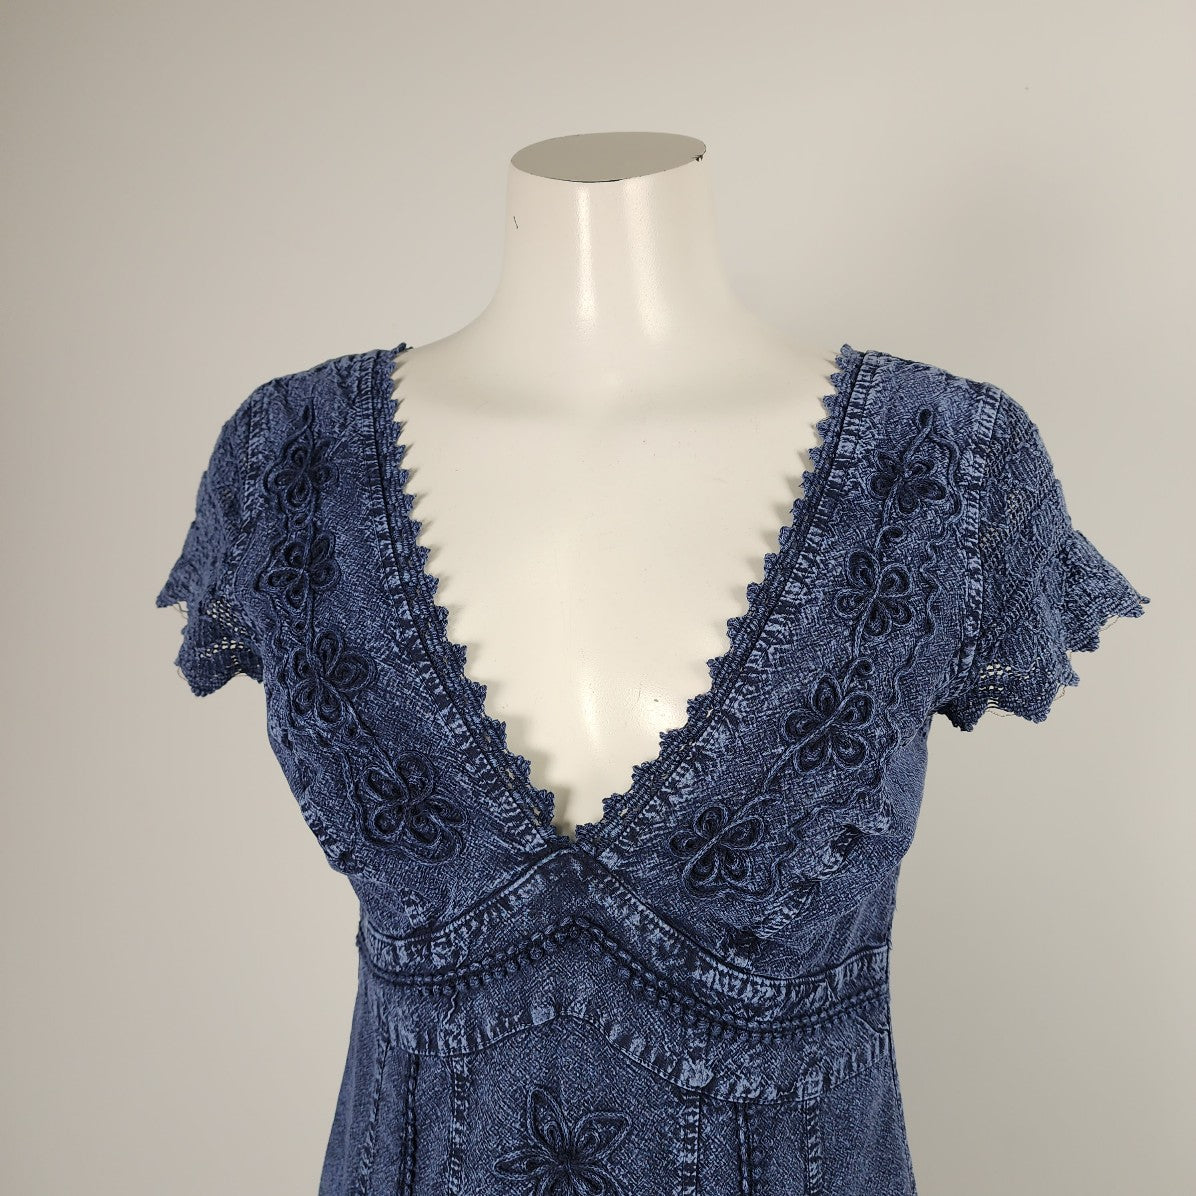 Compliments Blue Embroidered Floral Dress Size S